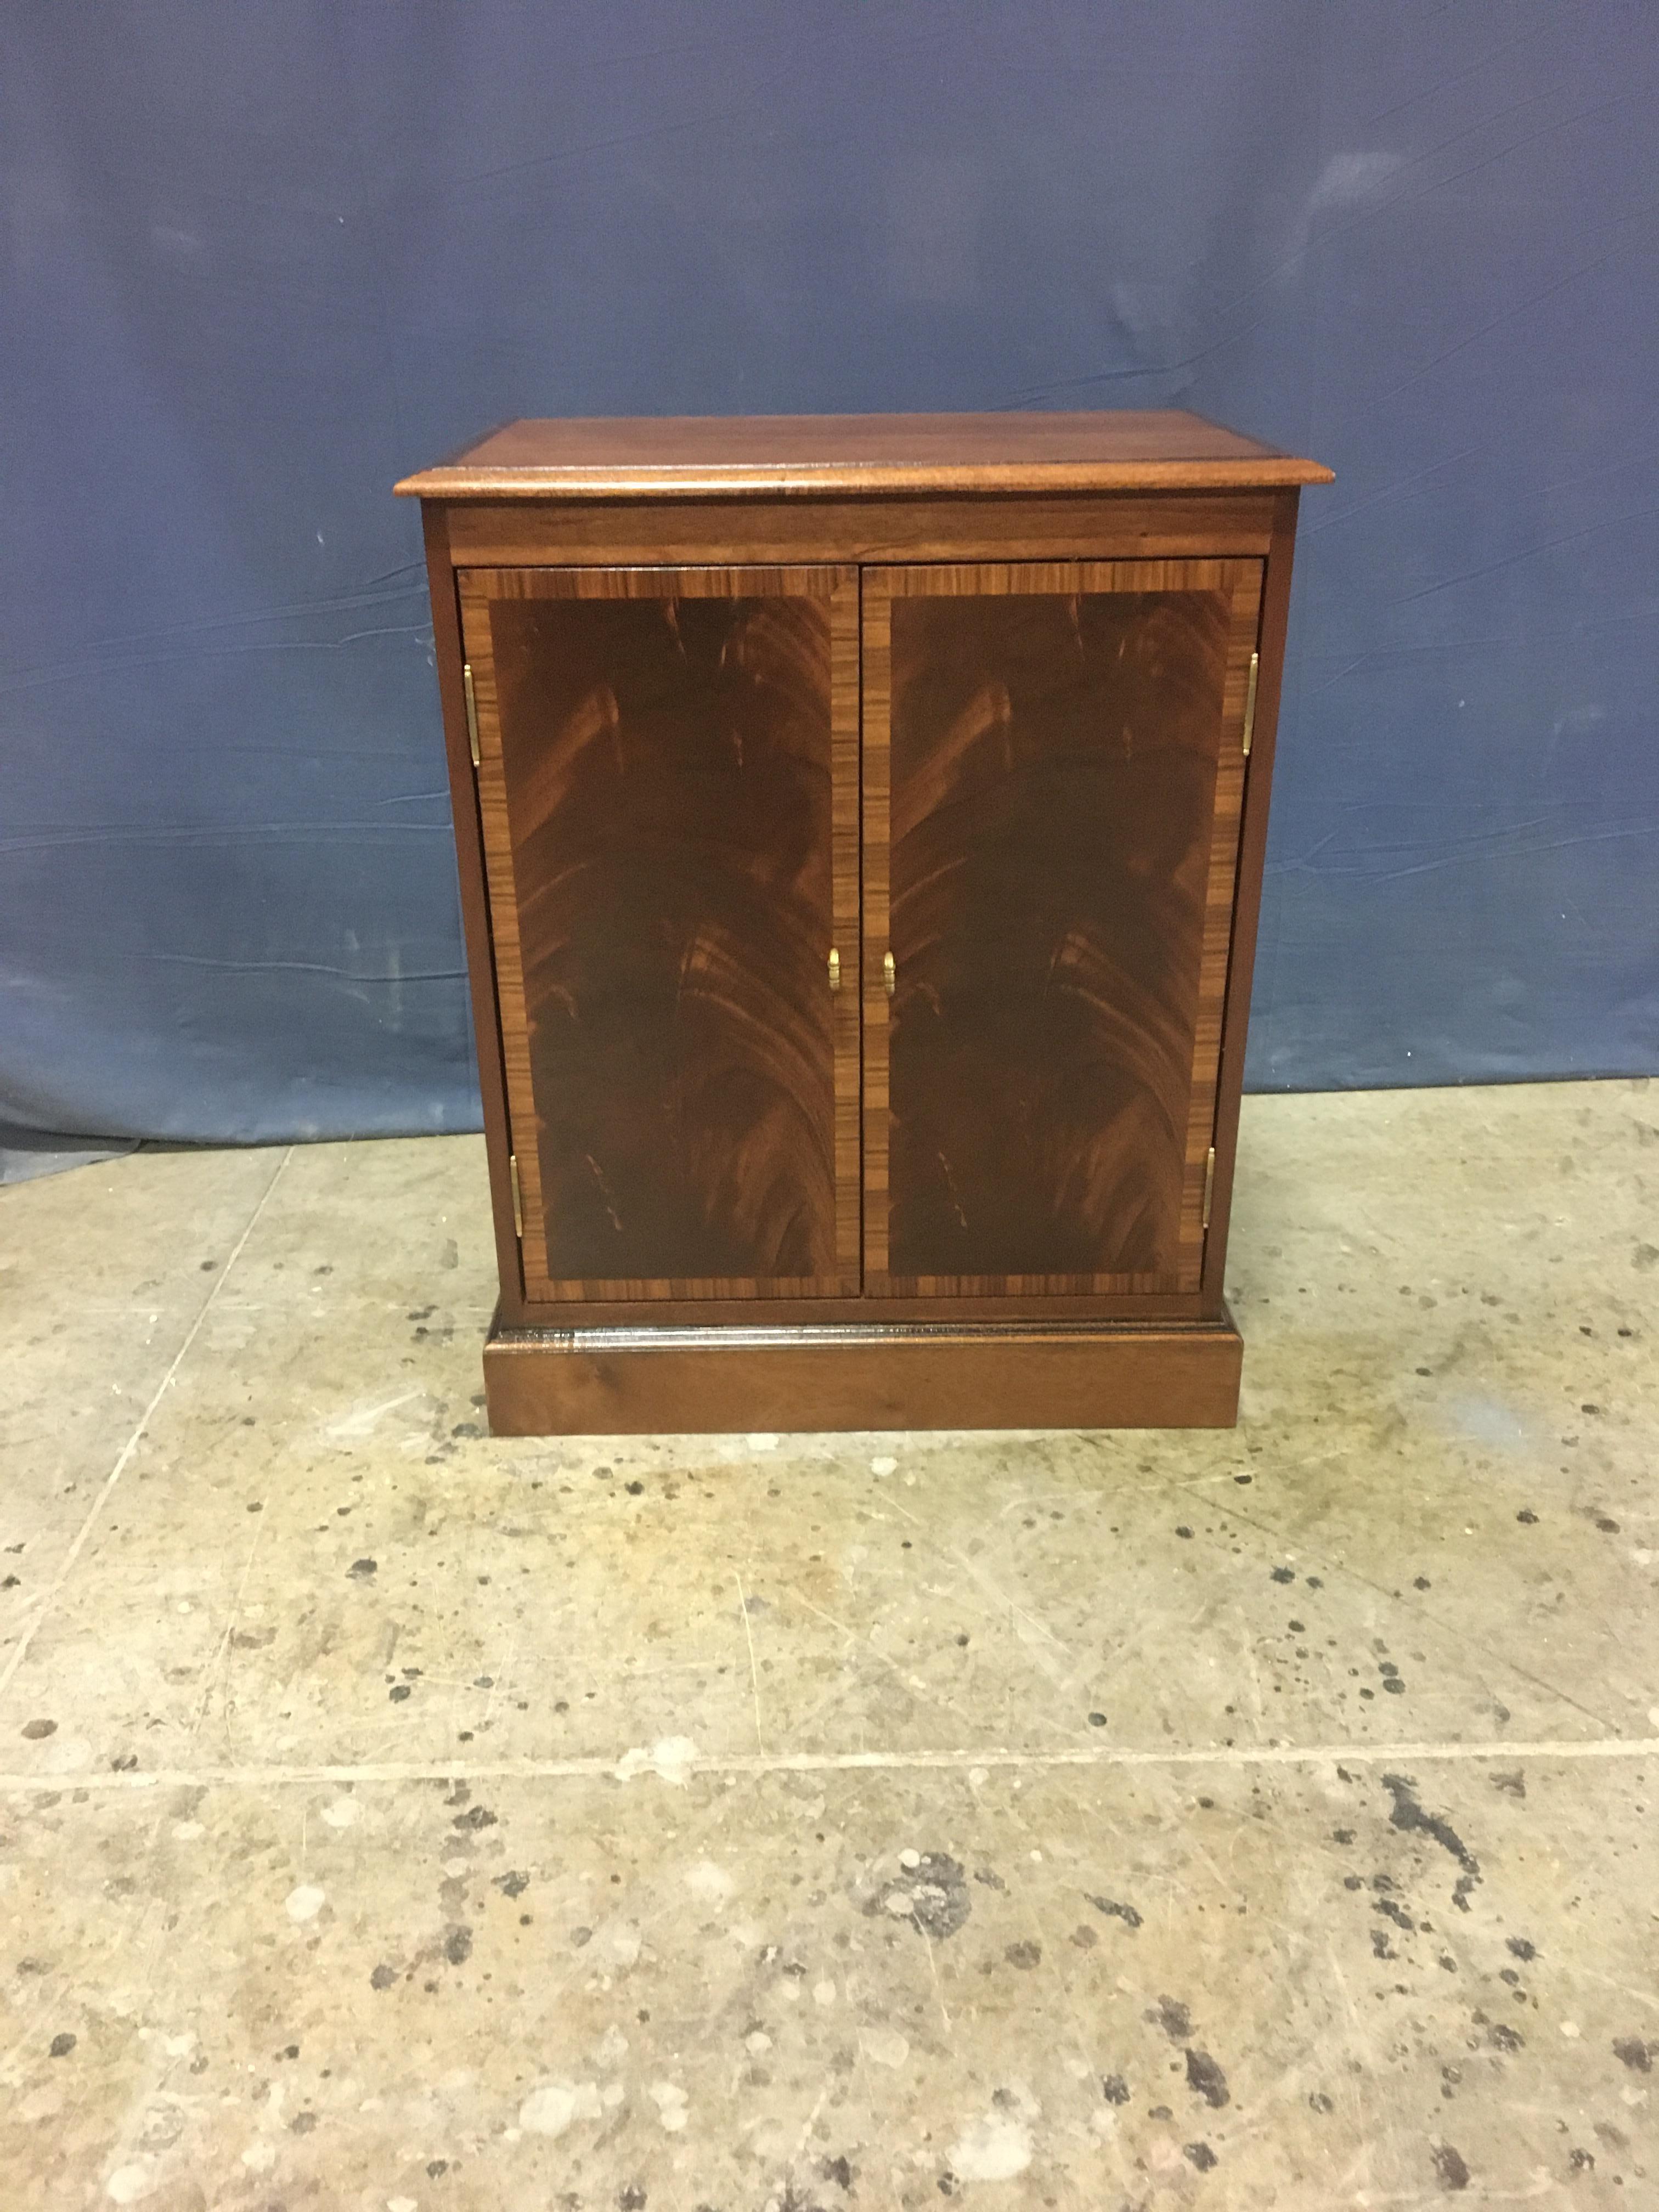 This is made-to-order traditional mahogany two-door cabinet made in the Leighton Hall shop. It is ideal to be used as a small buffet, hall cabinet/credenza or foyer cabinet. It features two doors with swirly crotch mahogany fields and a Pau Ferro